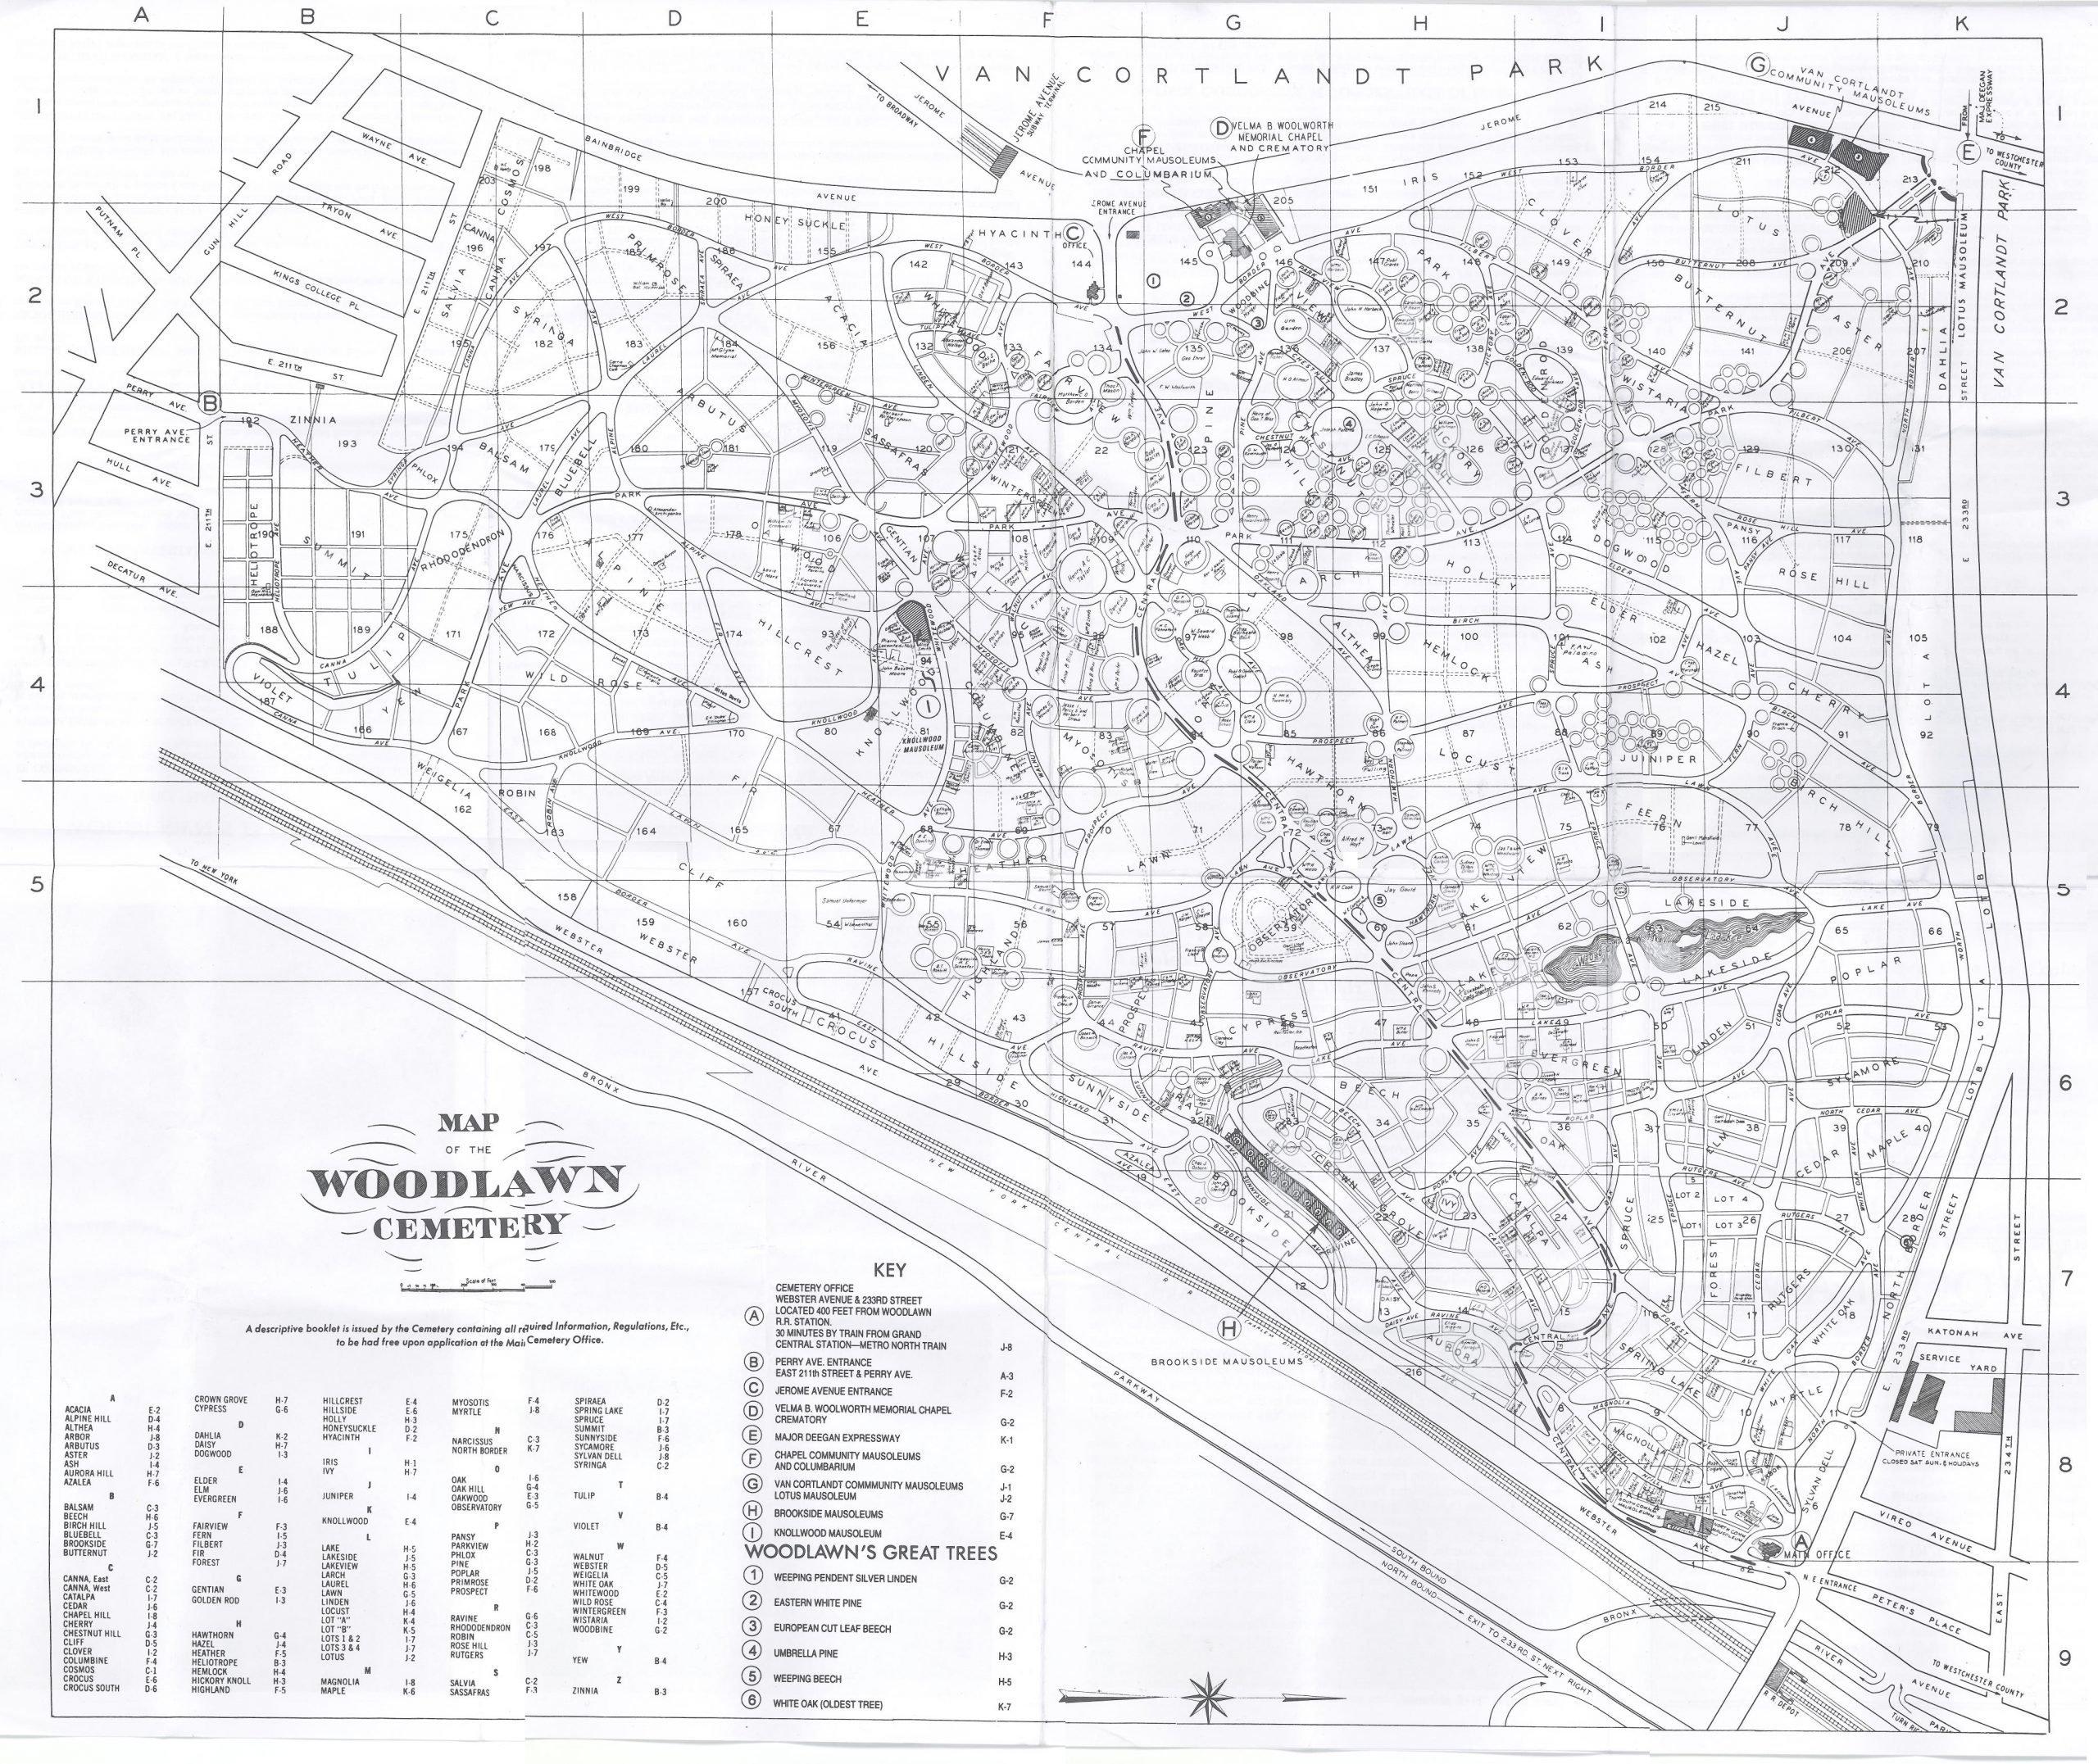 Cemetery Map of Woodlawn Cemetery in the Bronx New York